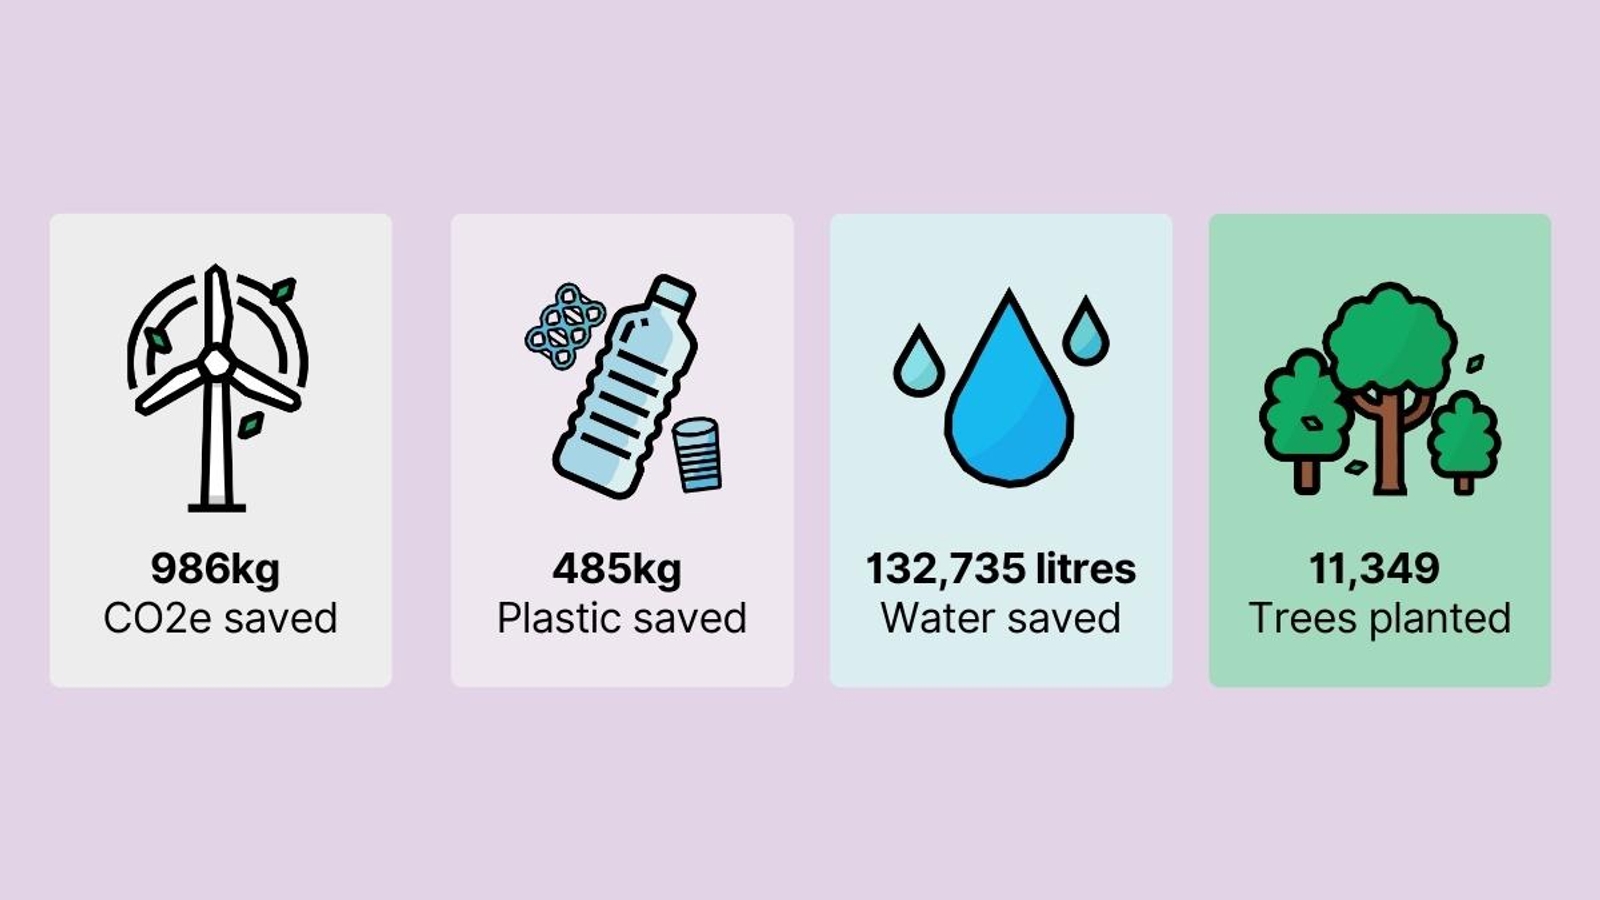 A graphic showing the Canopey Impact calculator - CO2e, plastic, and water saved along with trees planted